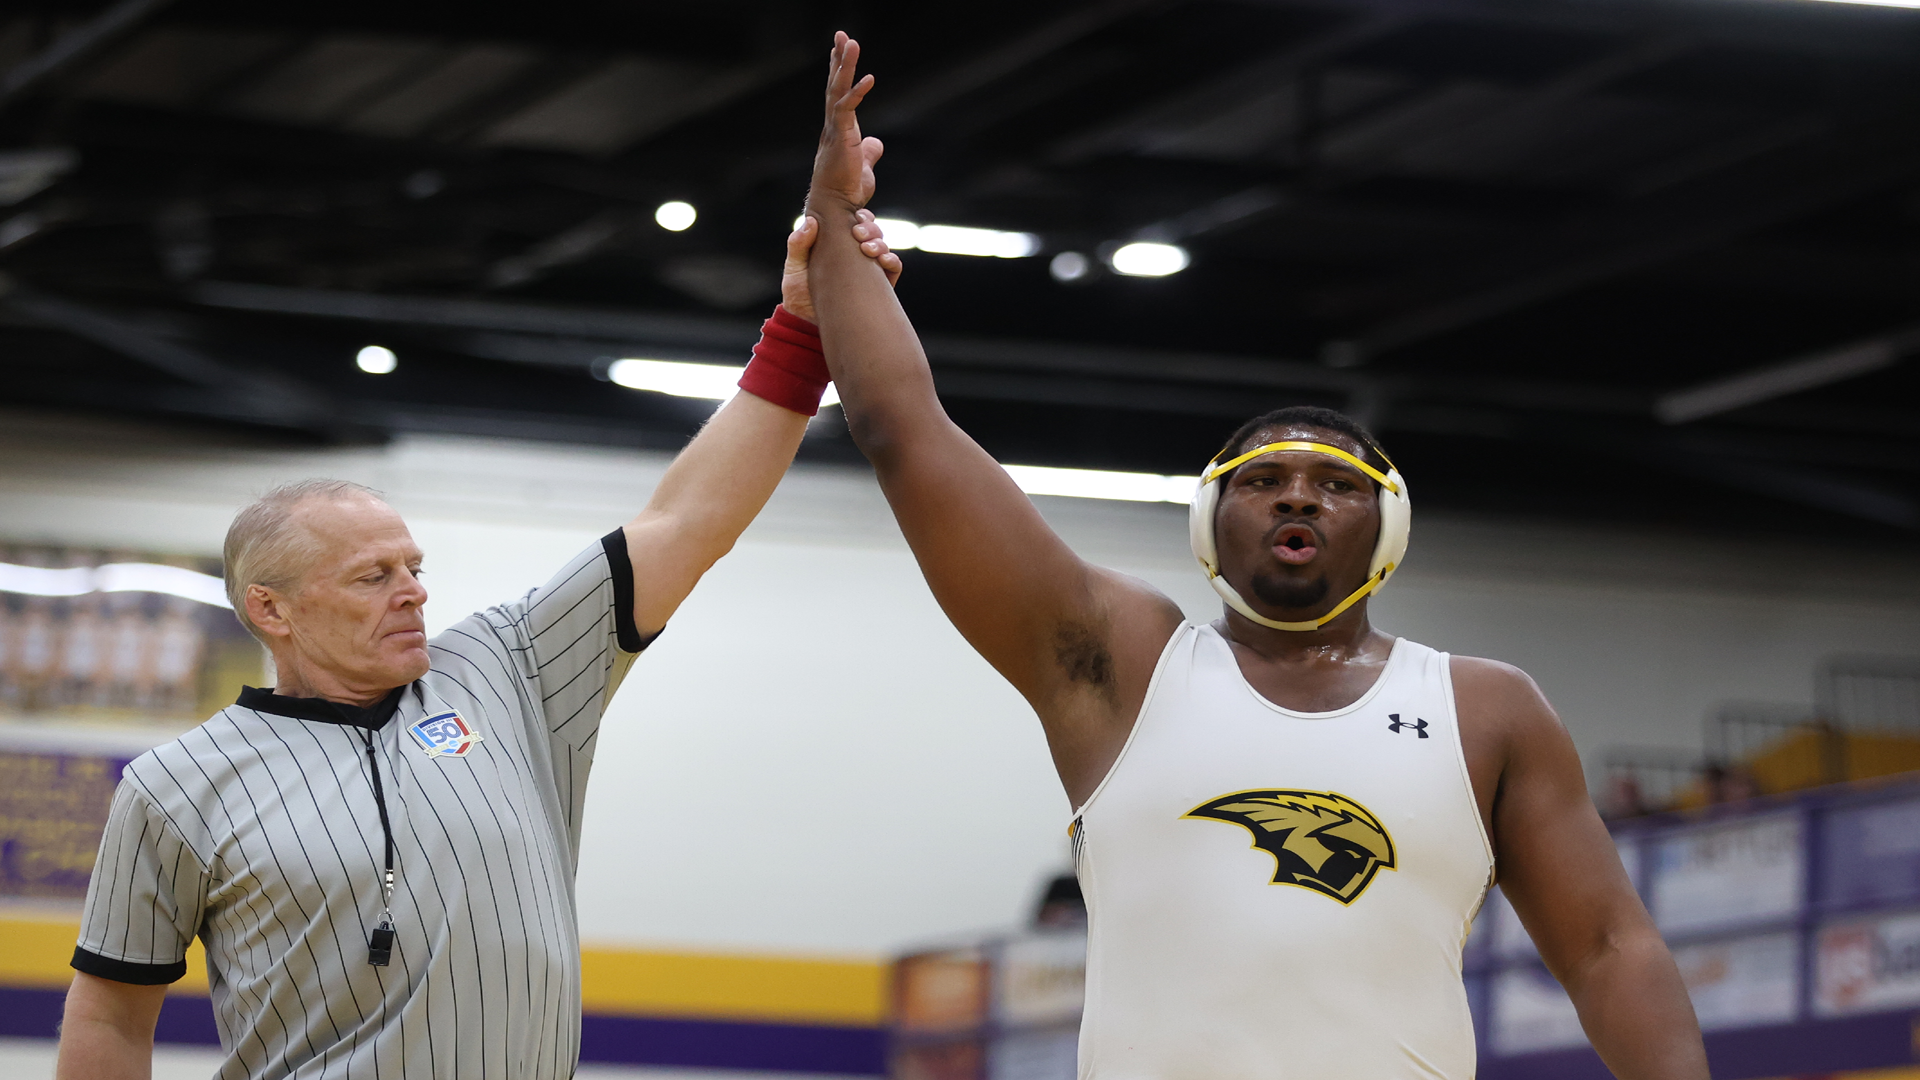 Guyon Cyprian Jr. qualified for the NCAA Division III Championship after placing third in the two-day Upper Midwest Regional. Phot Credit: Olivia Luther, UW-Stevens Point Sports Information